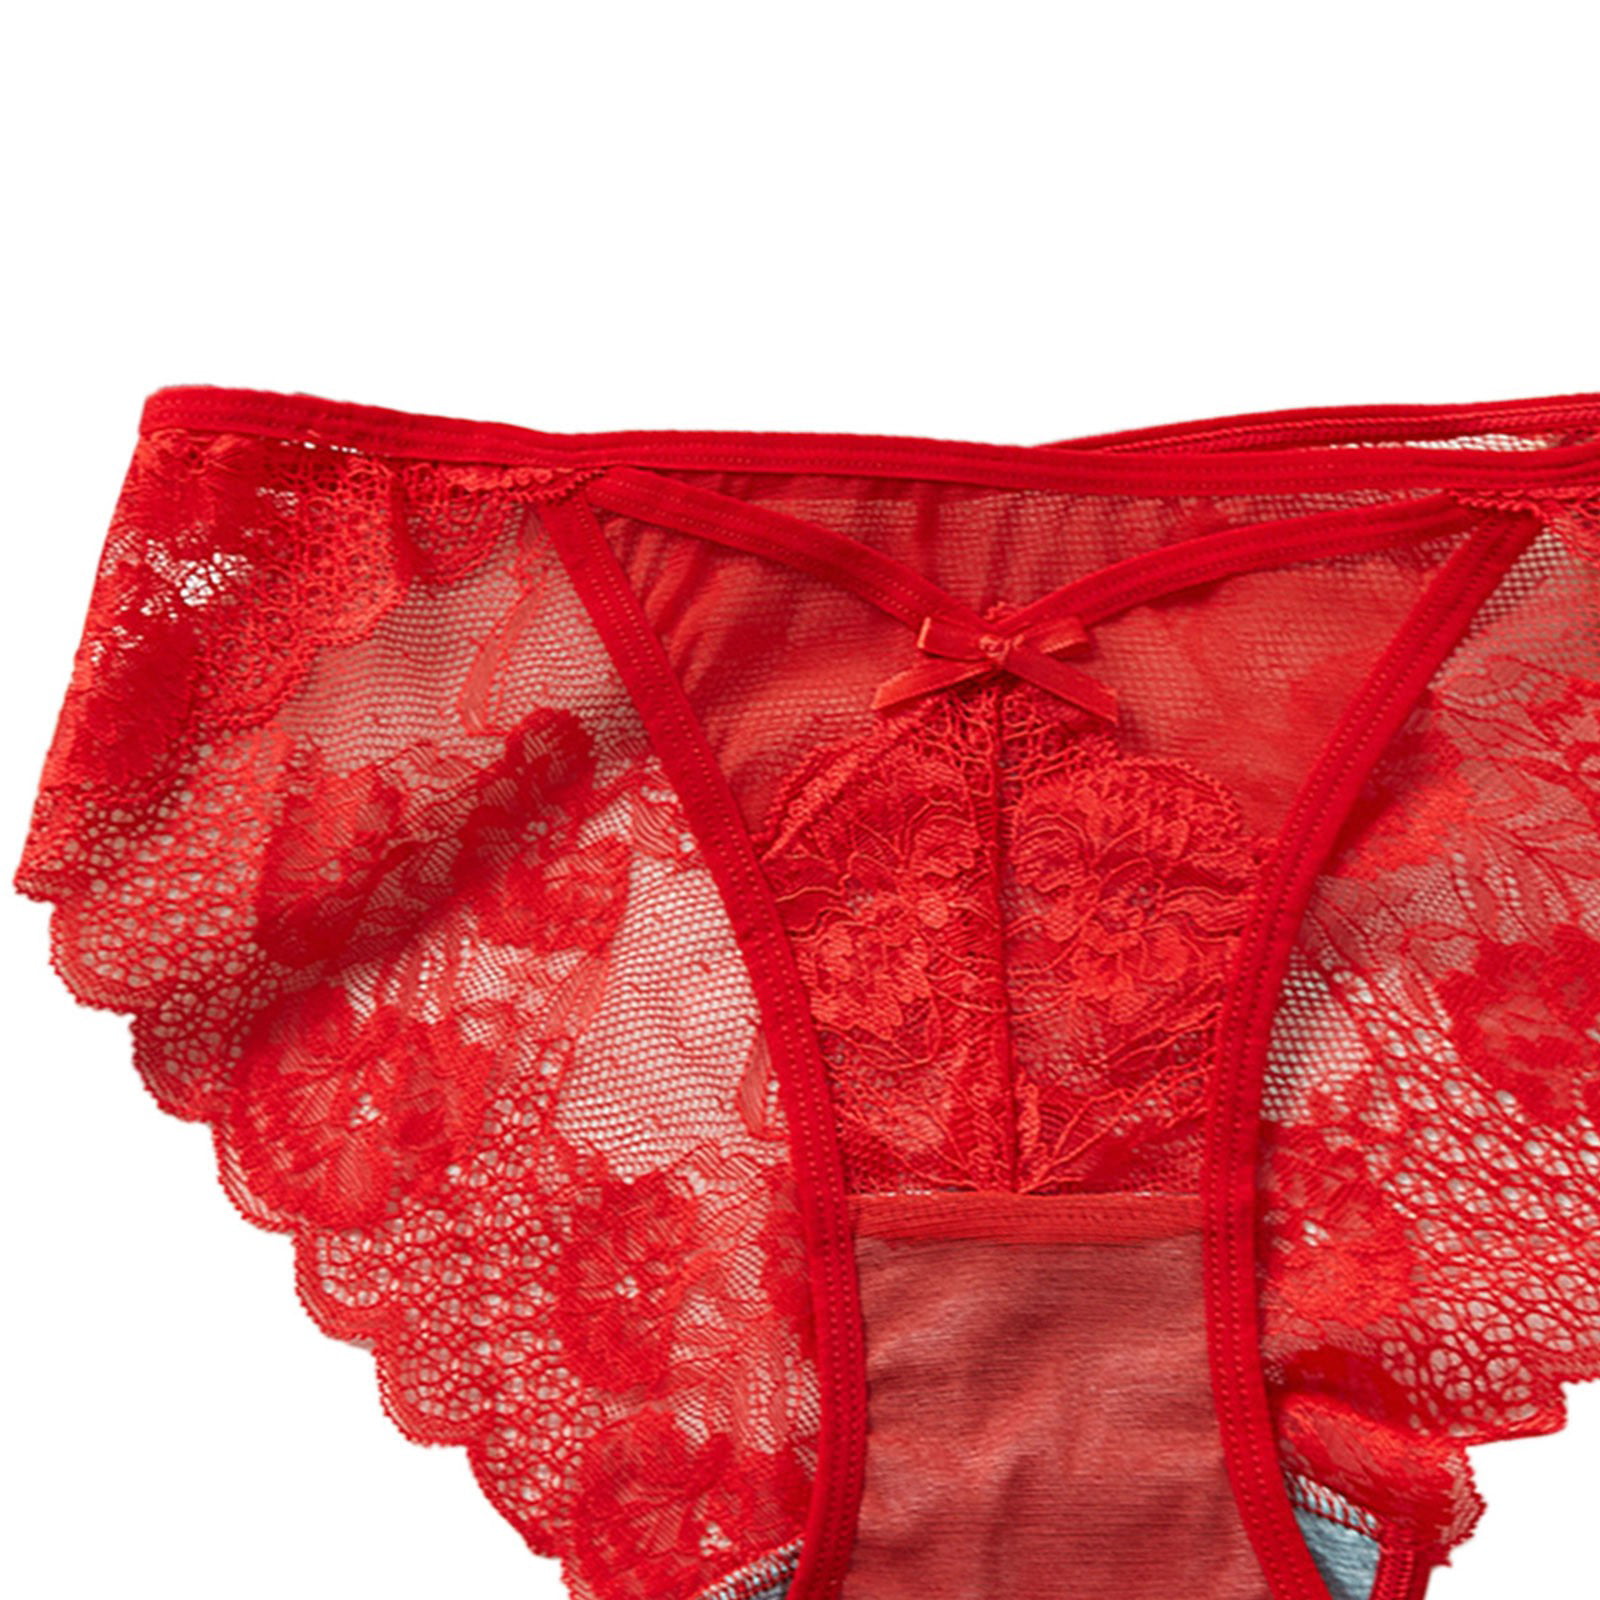 Comfortable Intimate Female Underpants Womens Red Lace Breathable